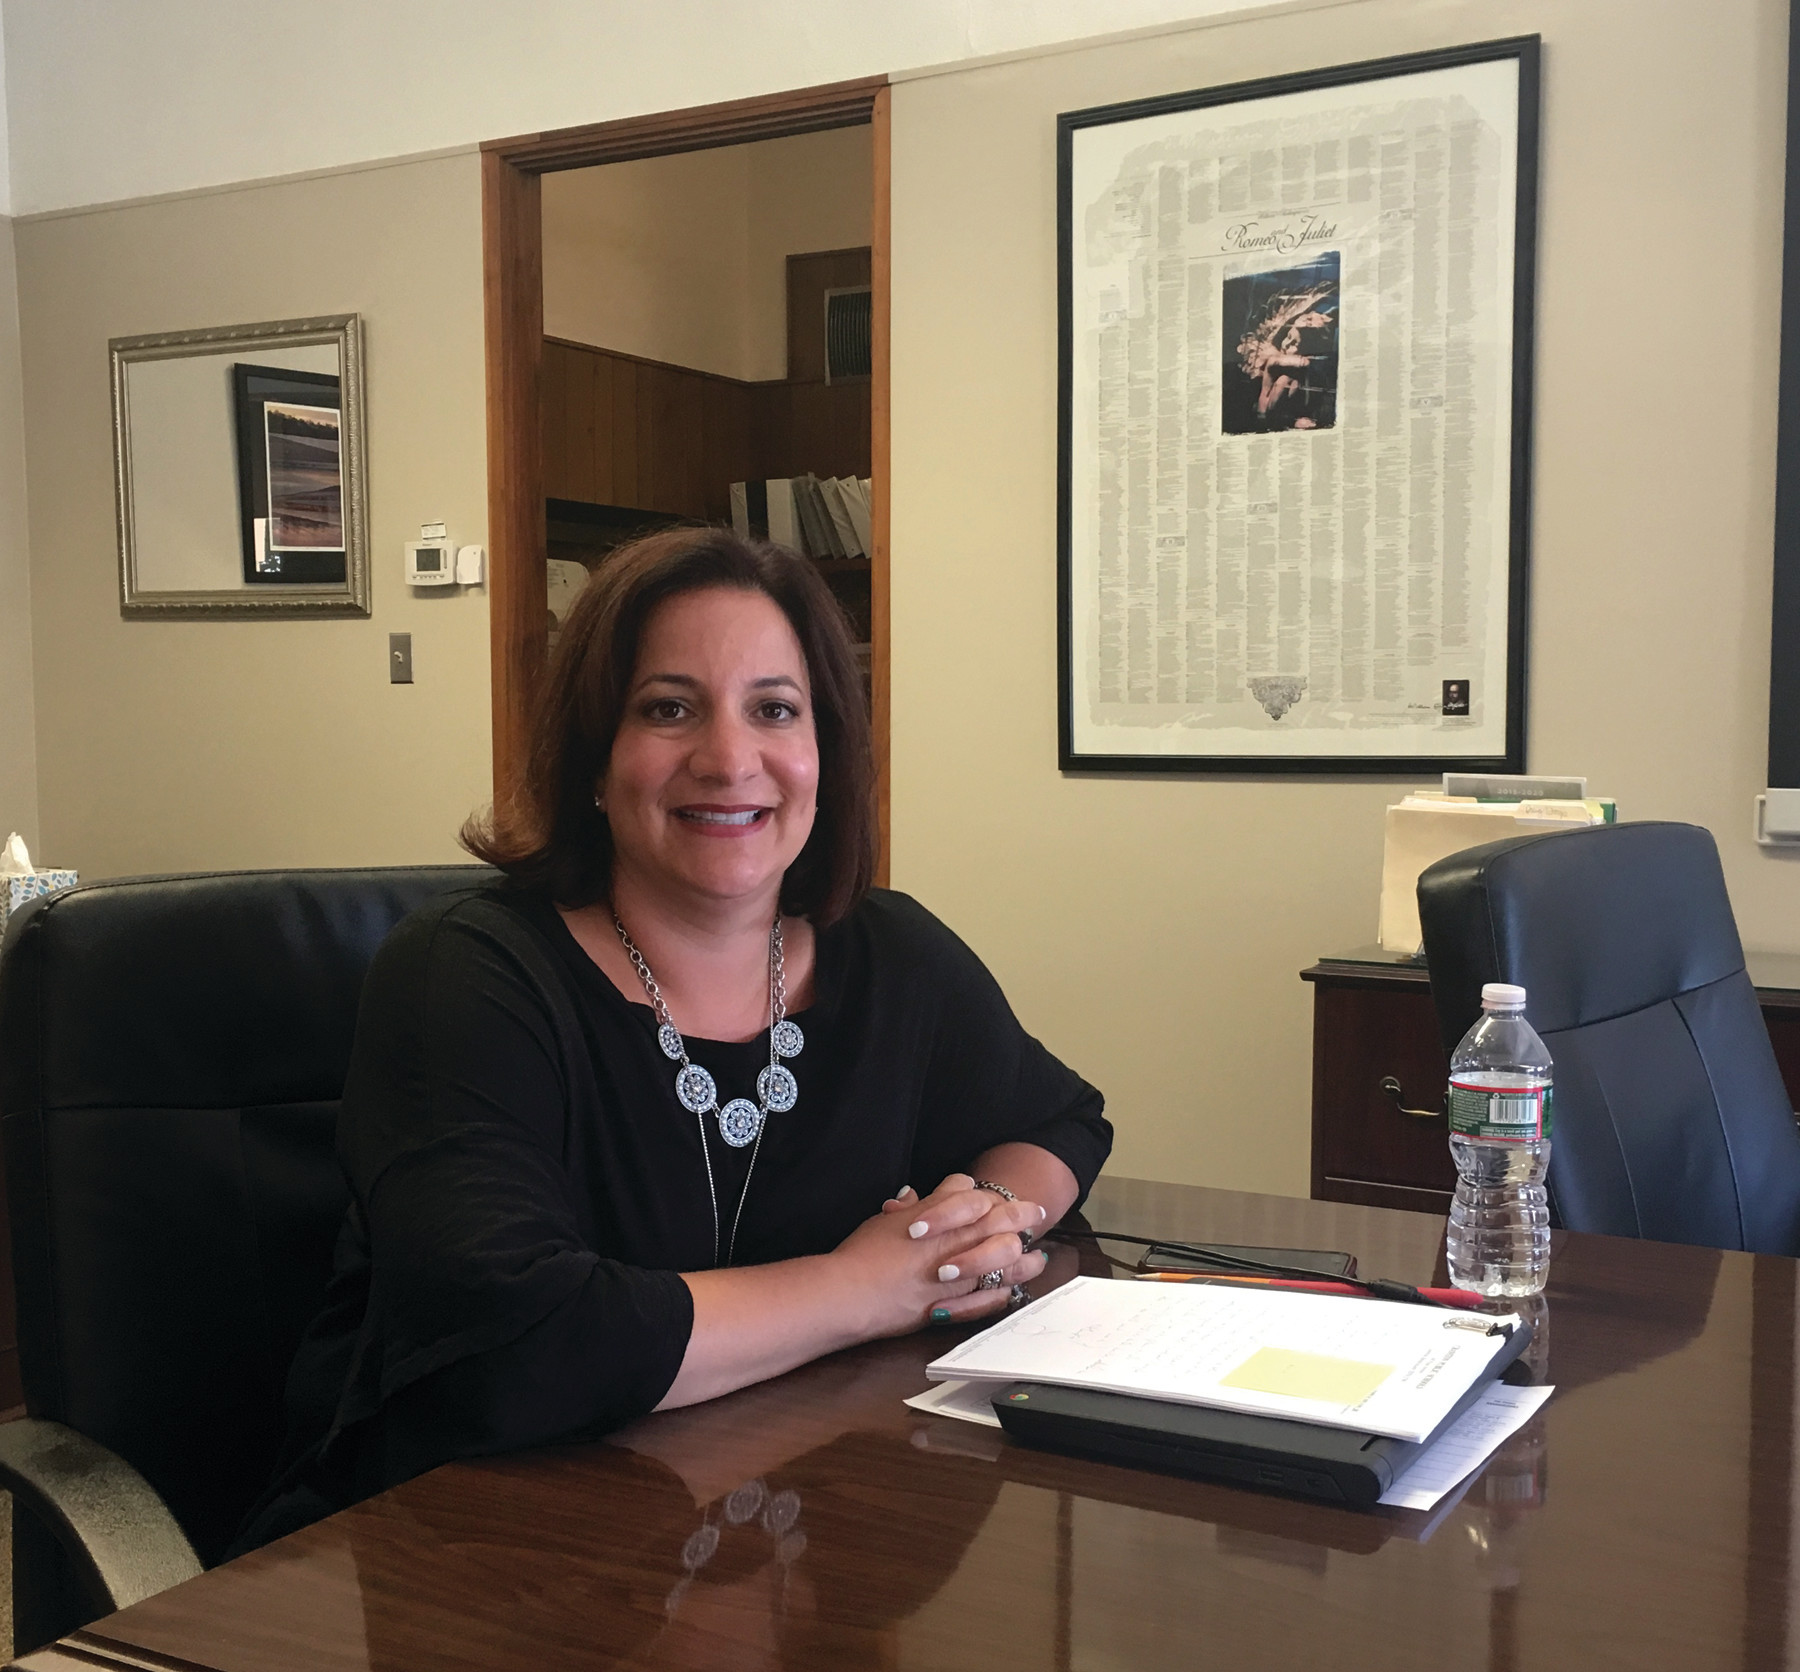 CLOSE TO HER ROOTS: Cranston Superintendent Jeannine Nota-Masse, a former English teacher, has a poster with the entirety of Romeo and Juliet on the wall in her office.